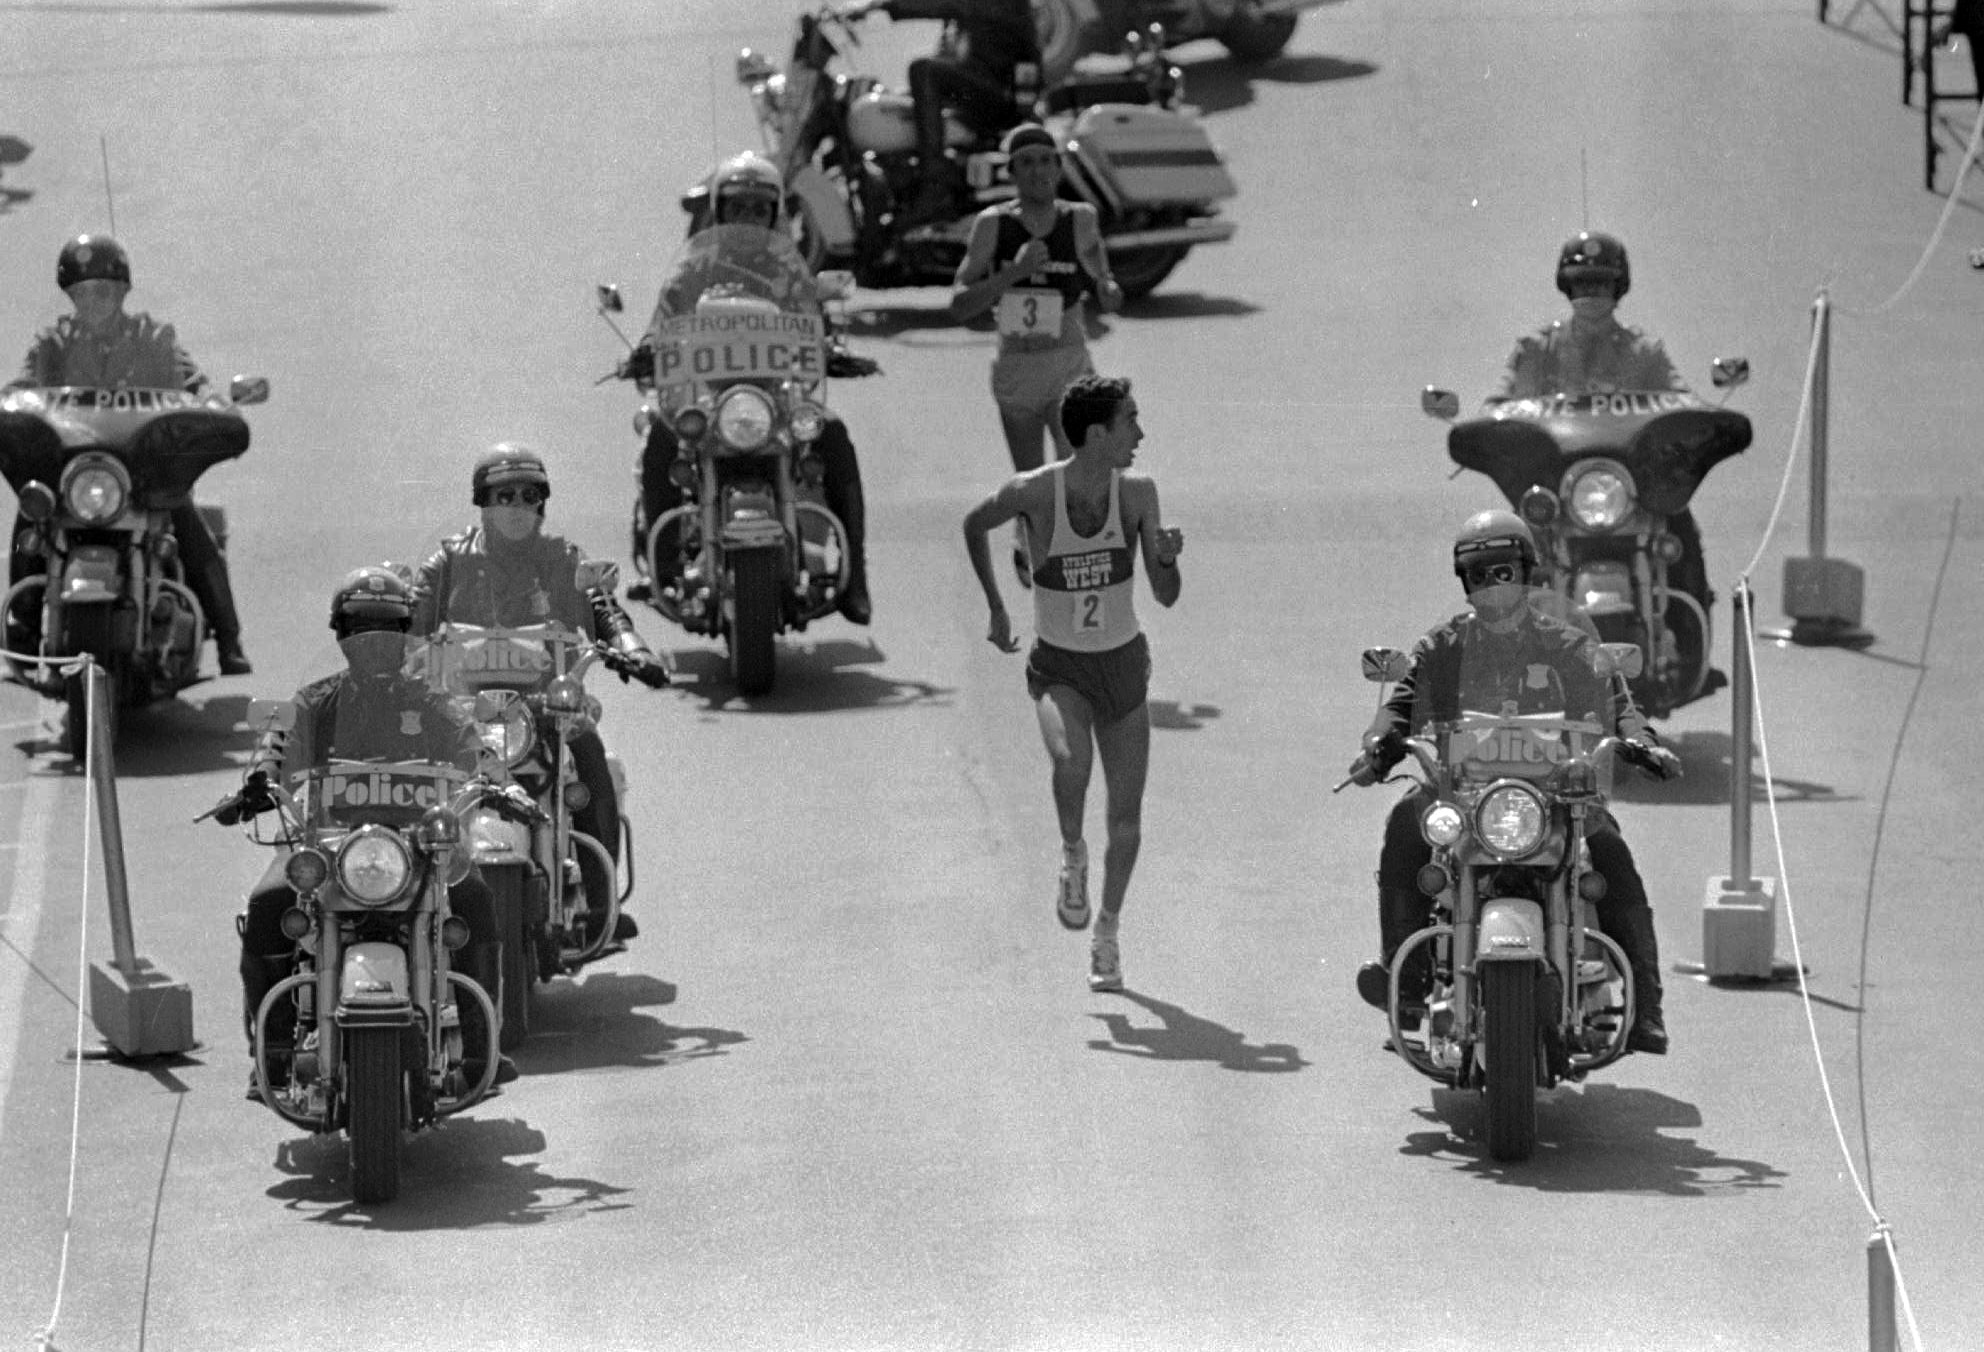 Alberto Salazar  looks over his shoulder to check on Dick Beardsley, rear, as they neared the finish line April 19, 1982 in the 86th annual Boston Marathon.  Salazar went on to win the 26-mile, 385-yard distance in 2:08.51.  Beardsley followed by two seconds.